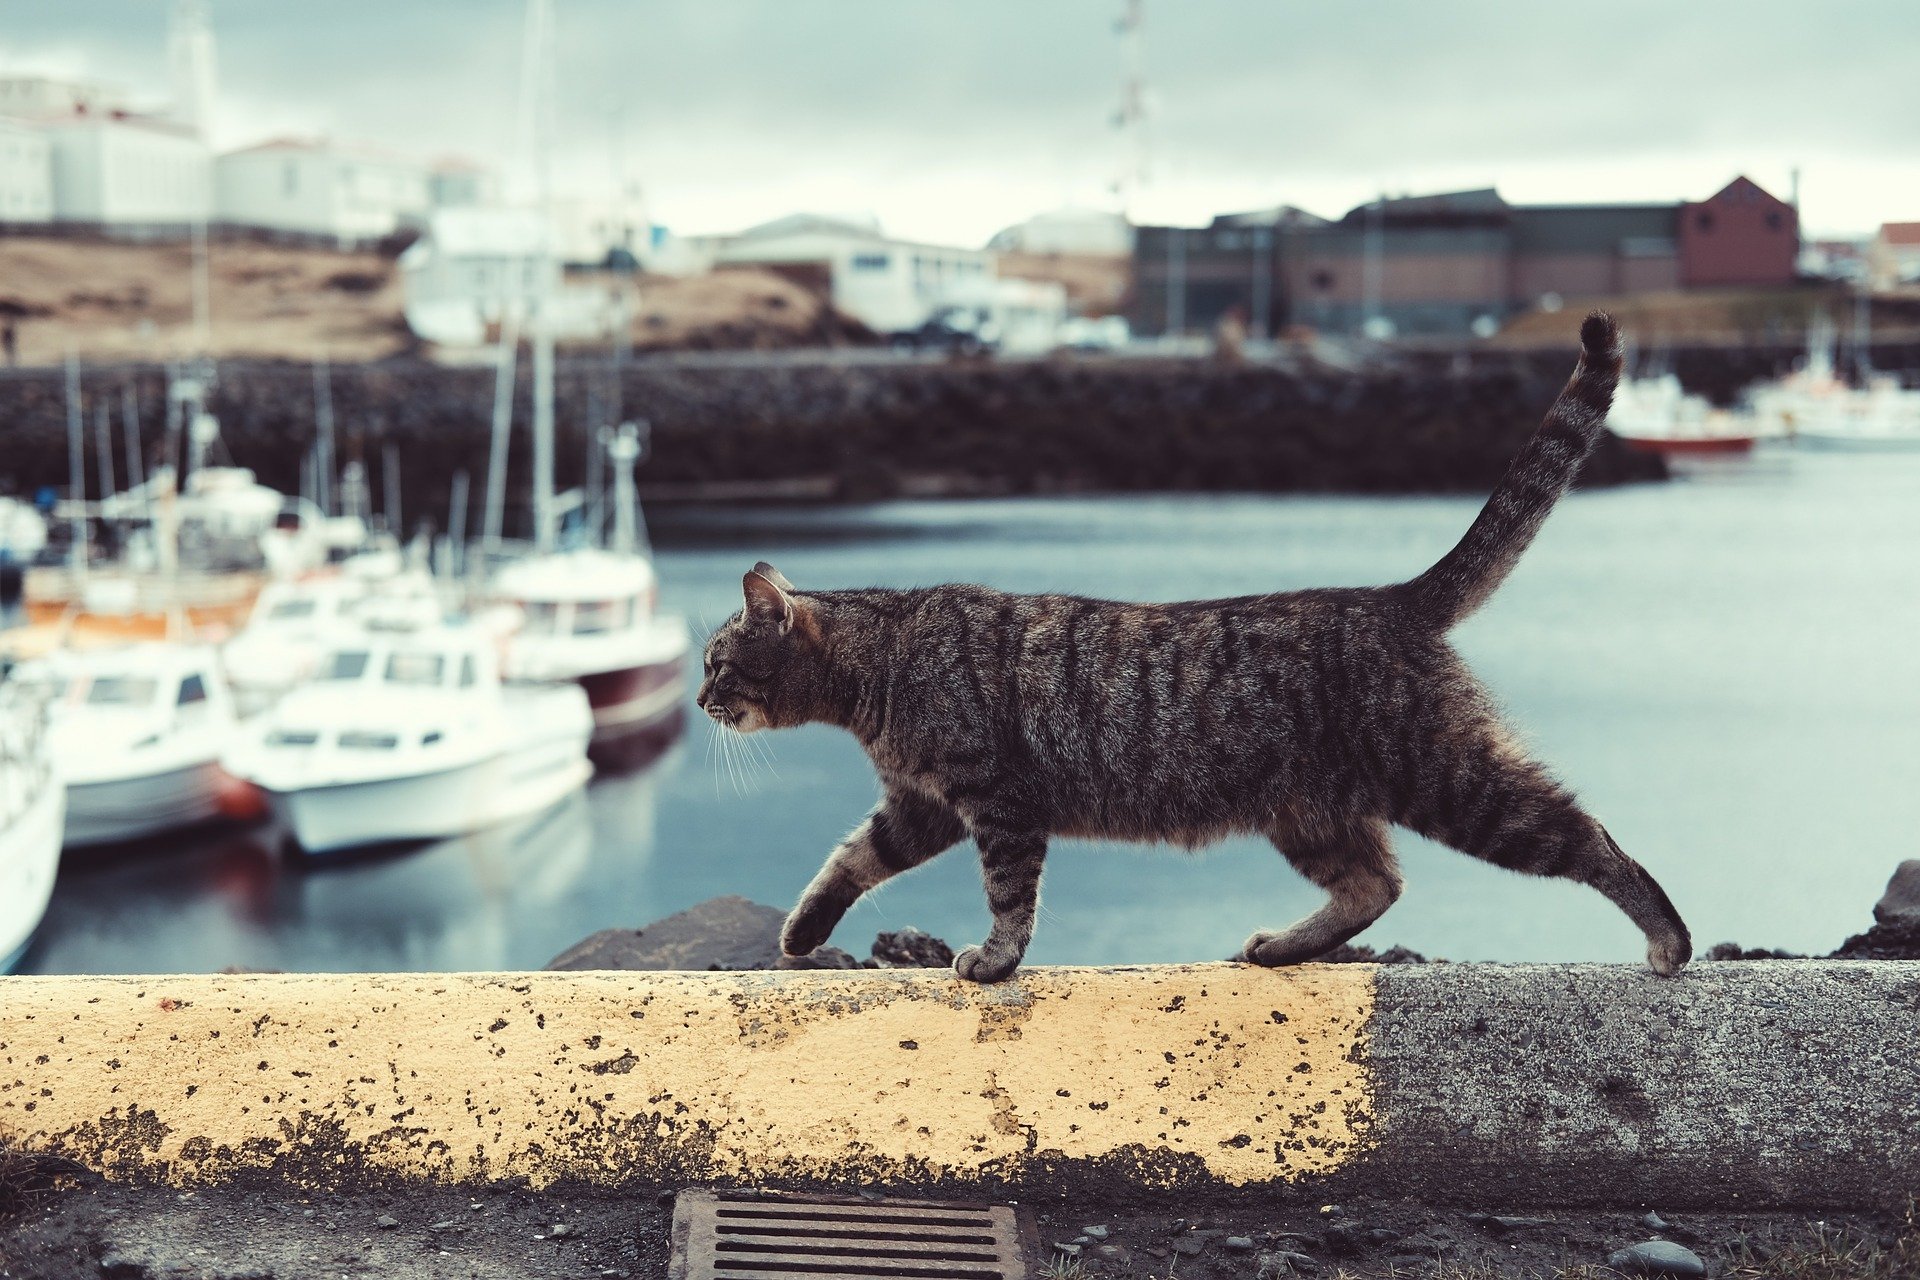 A cat walking on a wall in front of a harbor